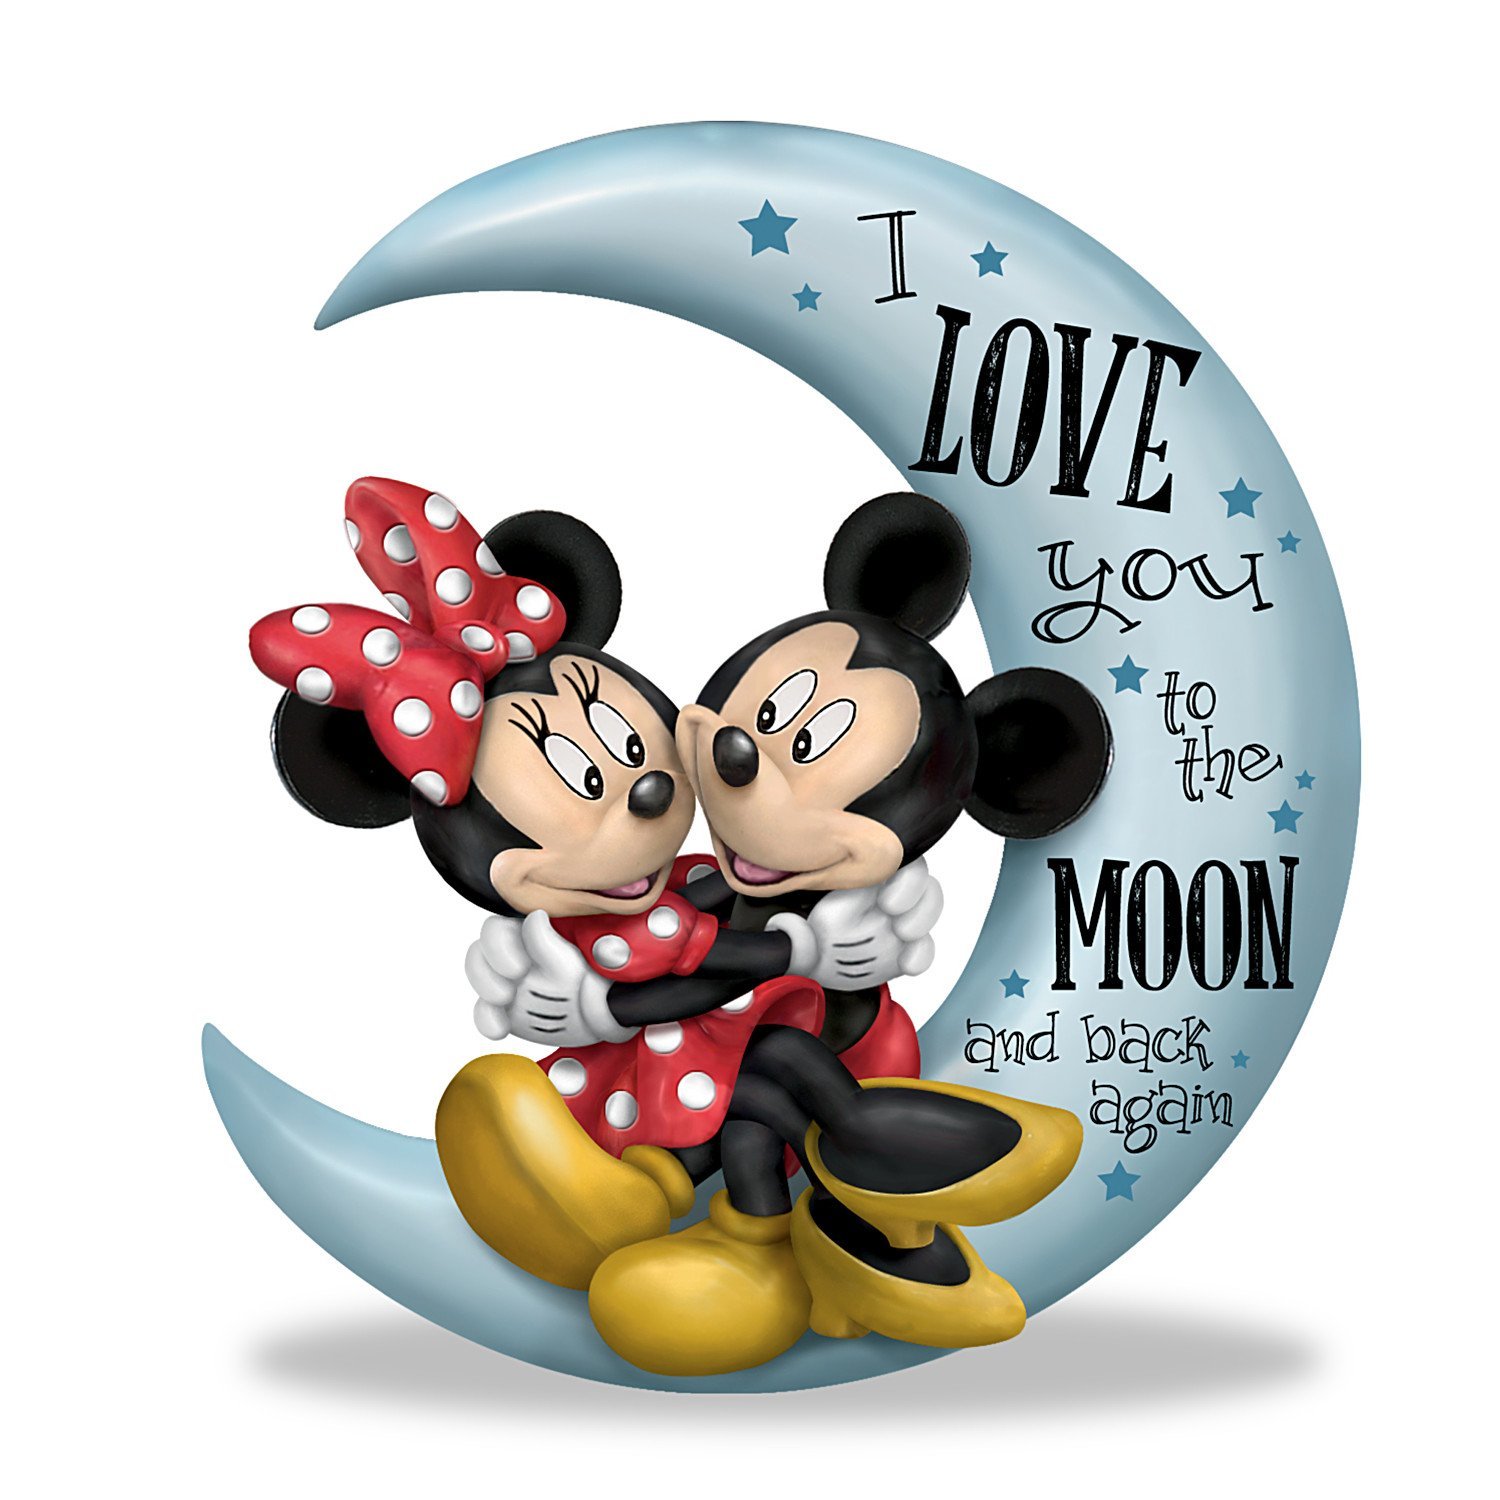 I Love You to the Moon and Back Again Disney Figurine